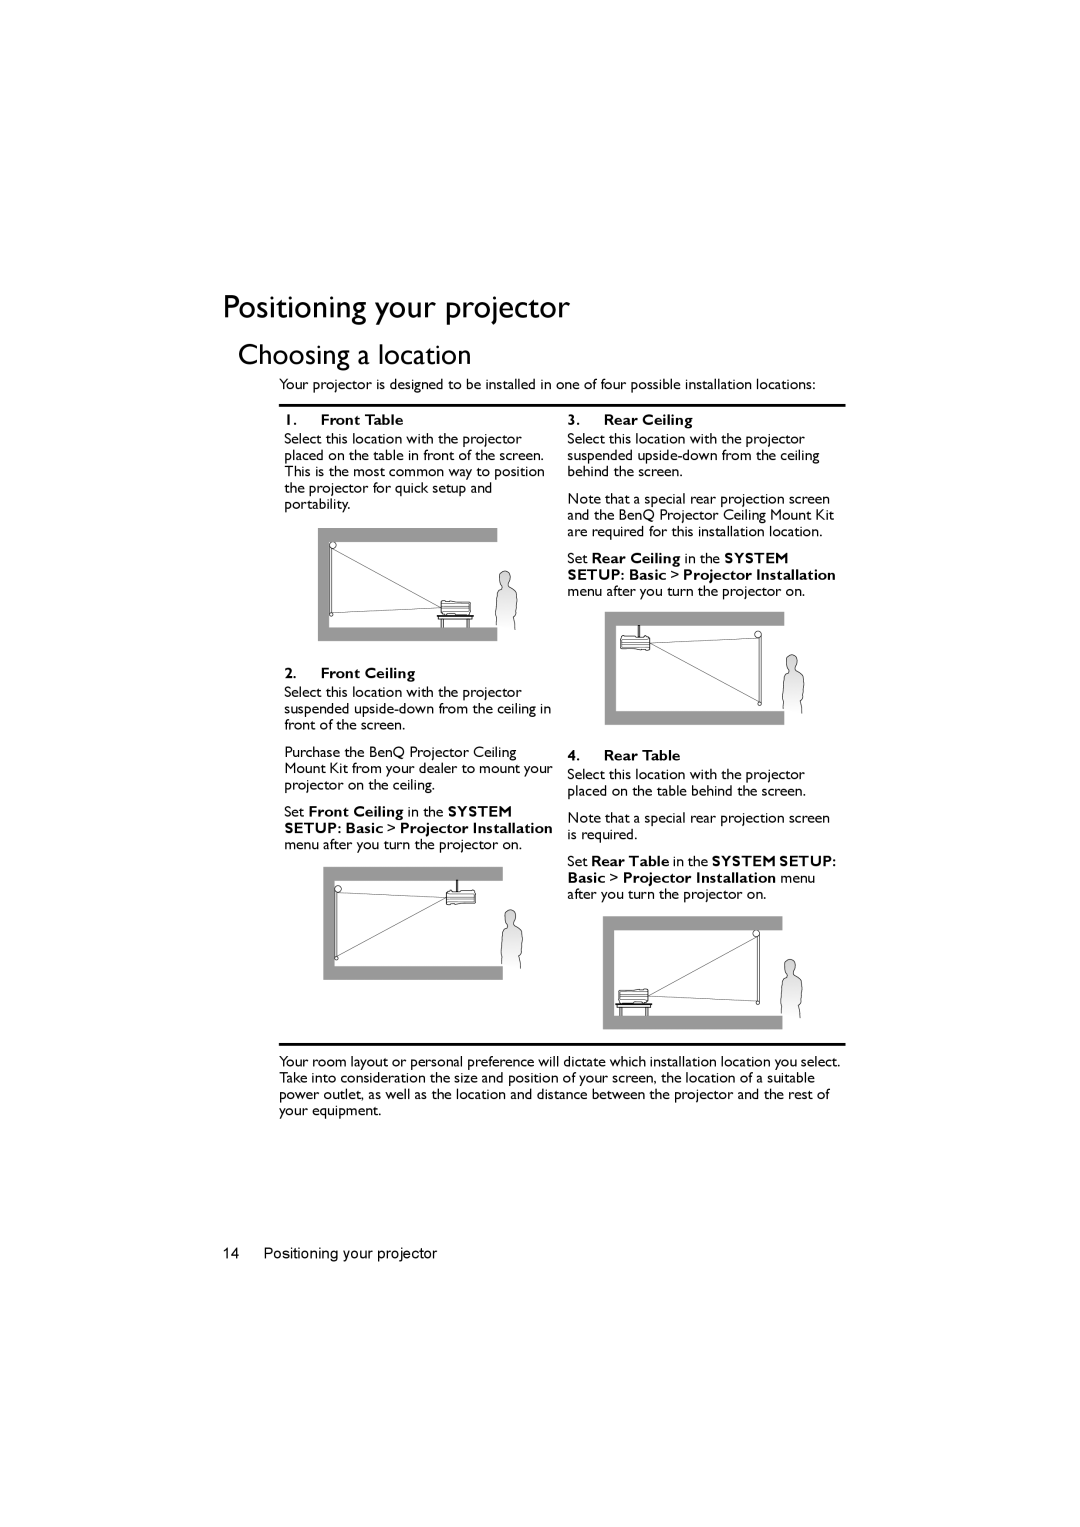 BenQ MX722 user manual Positioning your projector, Choosing a location 